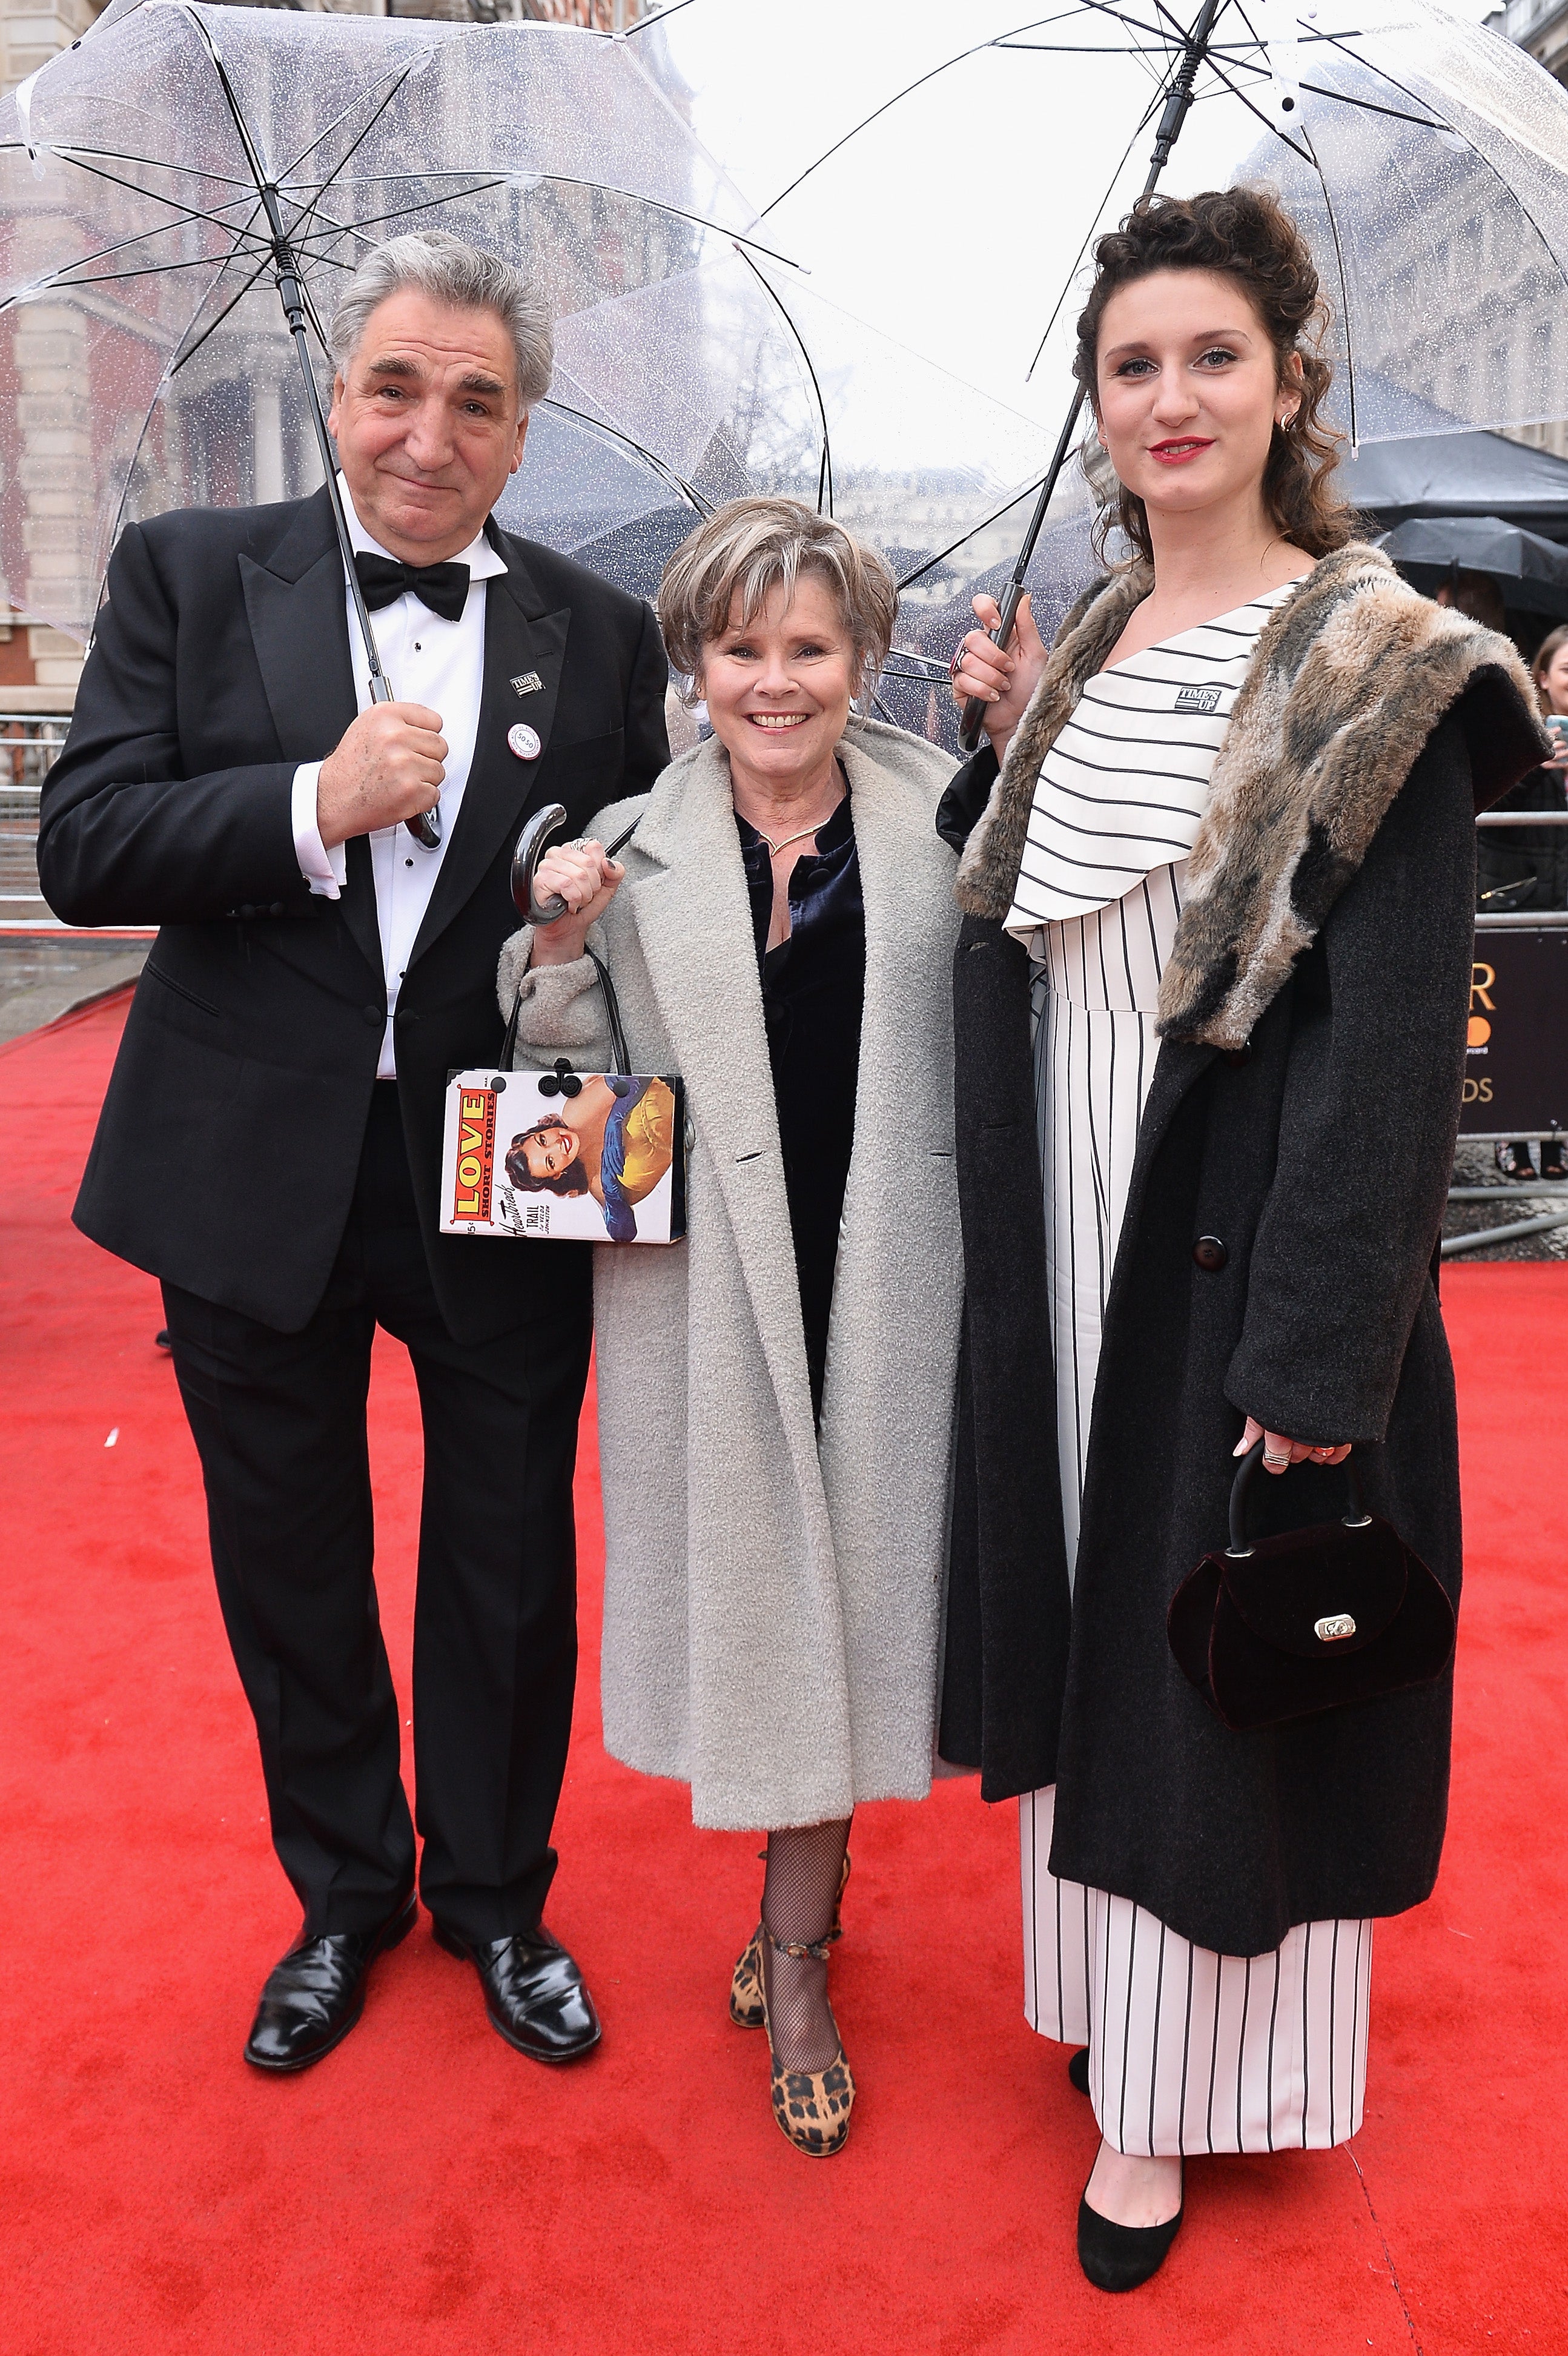 Jim Carter, Imelda Staunton and Bessie Carter attend The Olivier Awards with Mastercard at Royal Albert Hall on April 8, 2018